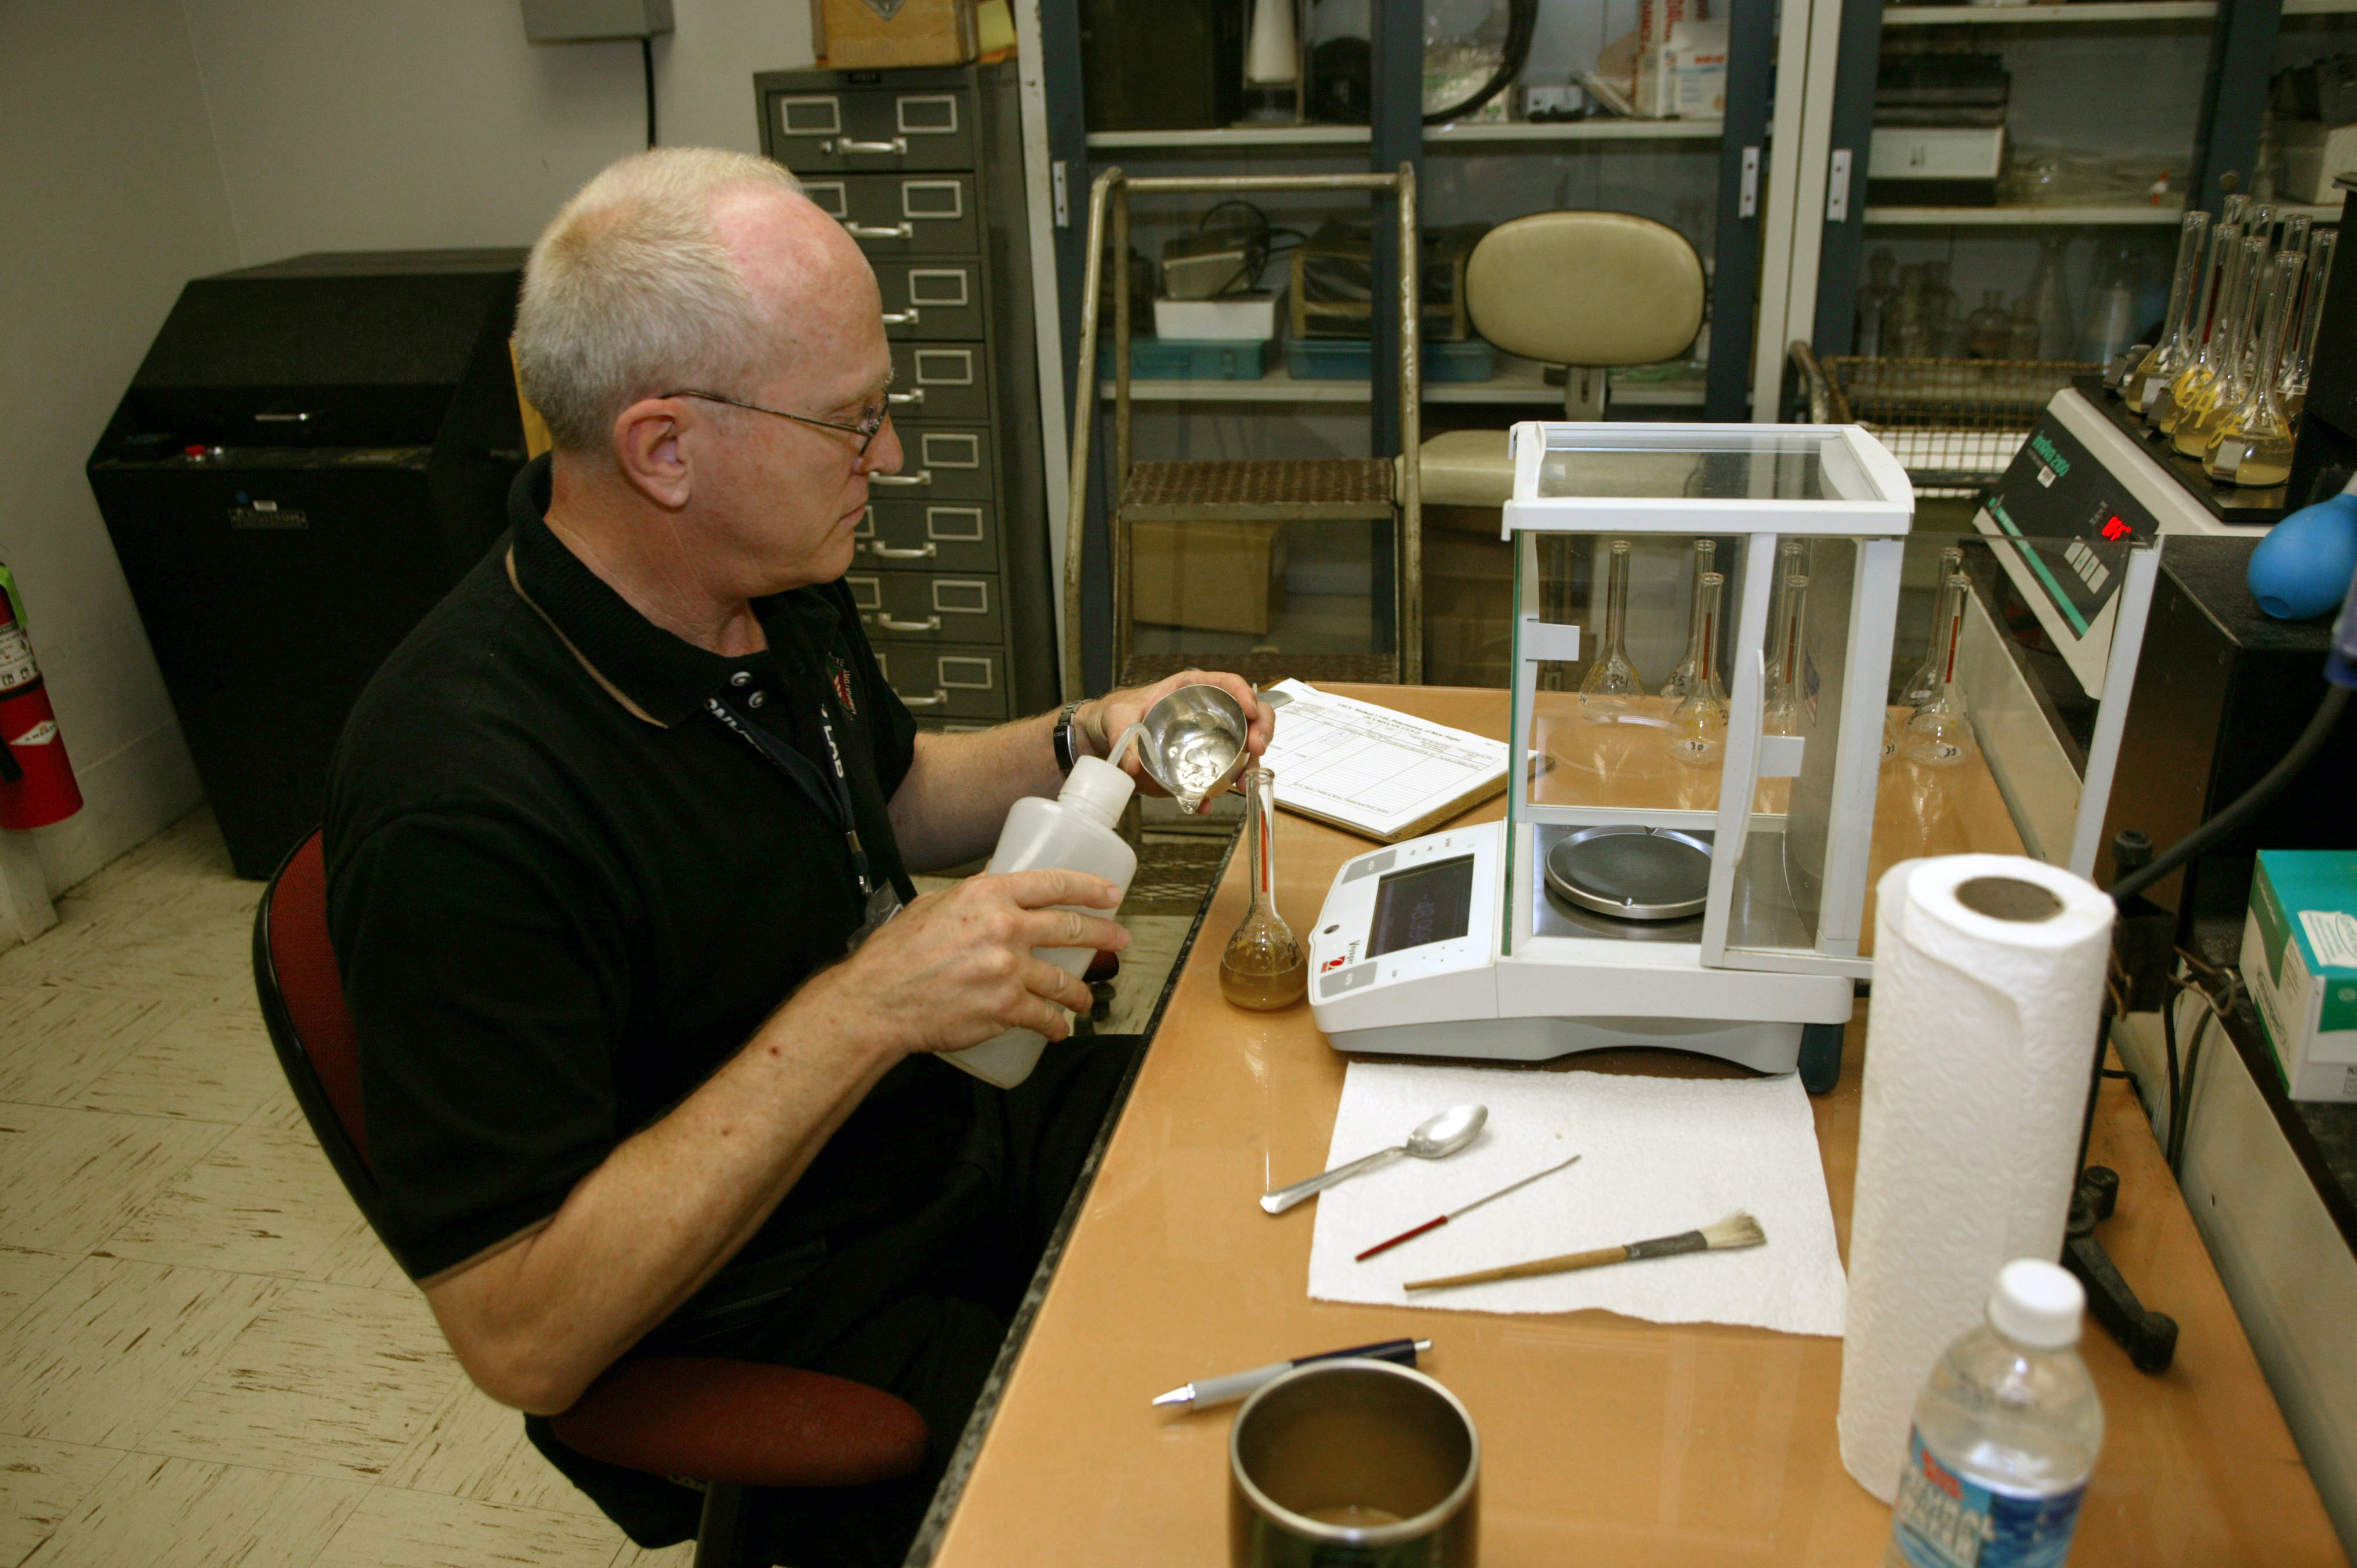 CBP Laboratory personnel prepare samples of metal to be analyzed.